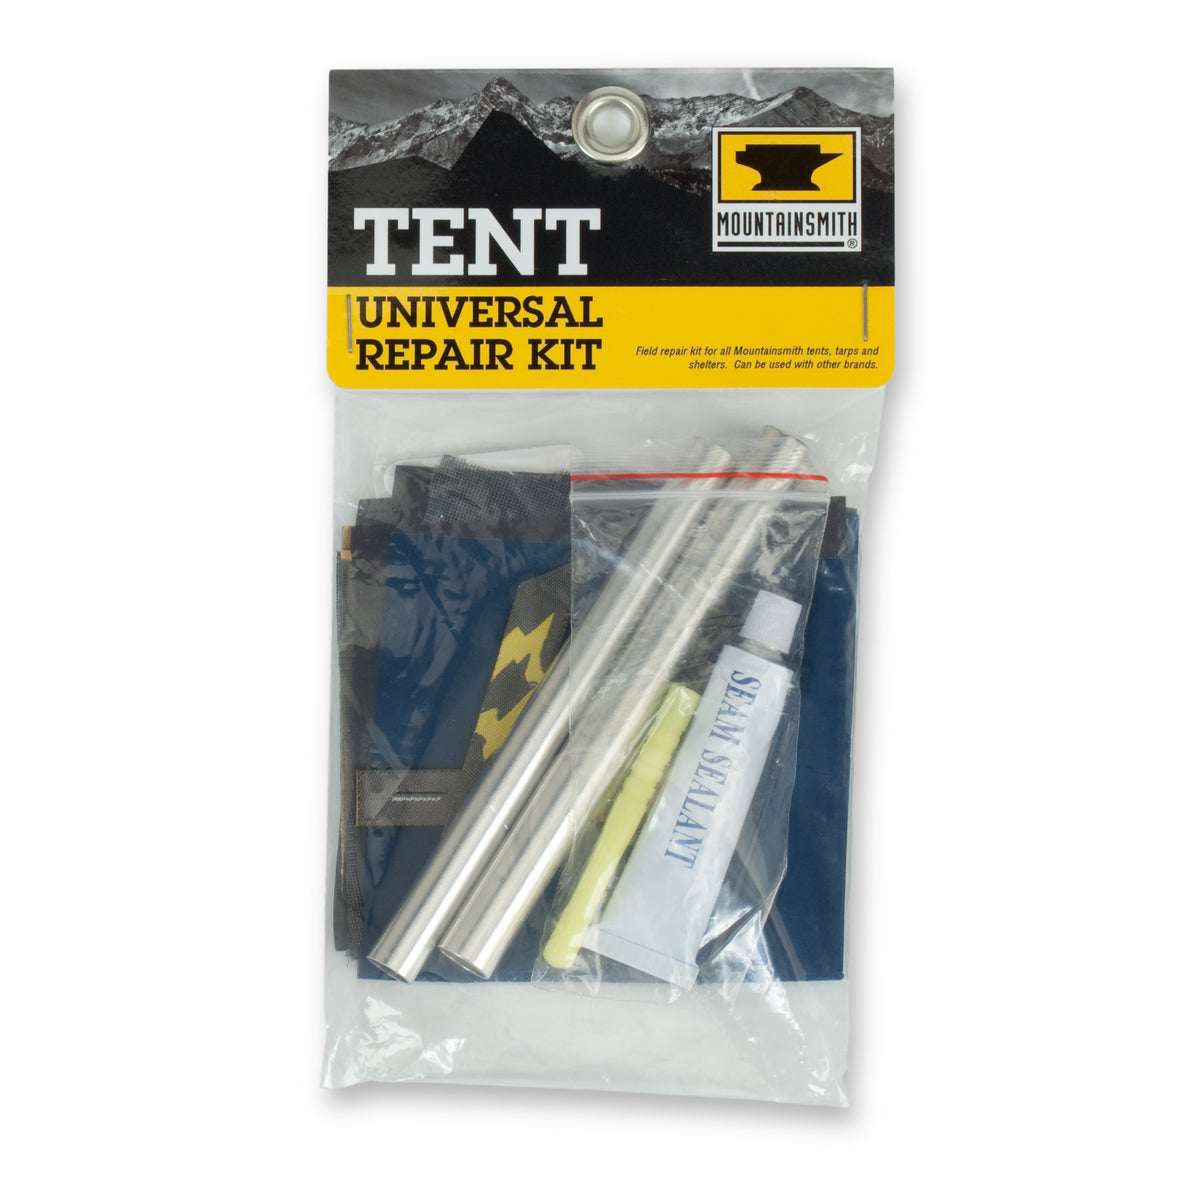 Strap Repair Kit for Tent Top – Central Tent